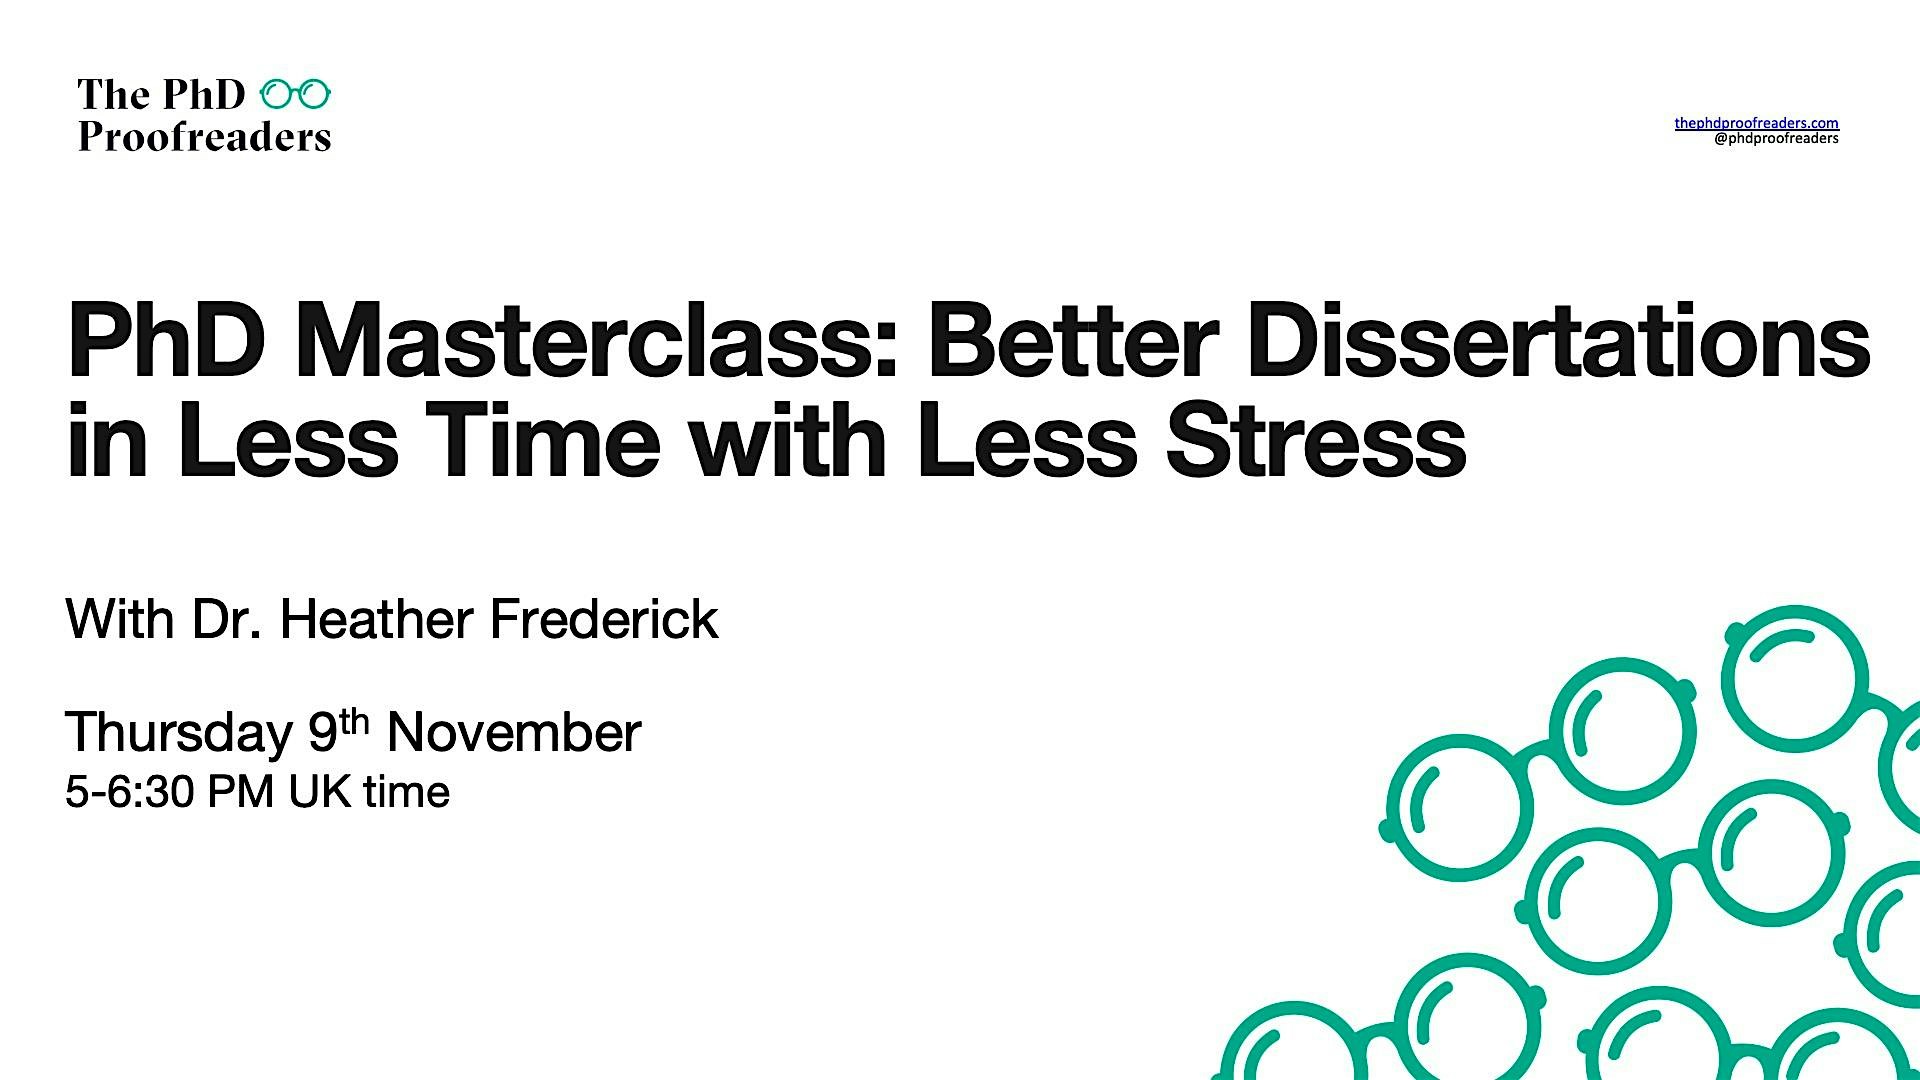 PhD Masterclass: Better Dissertations in Less Time with Less Stress